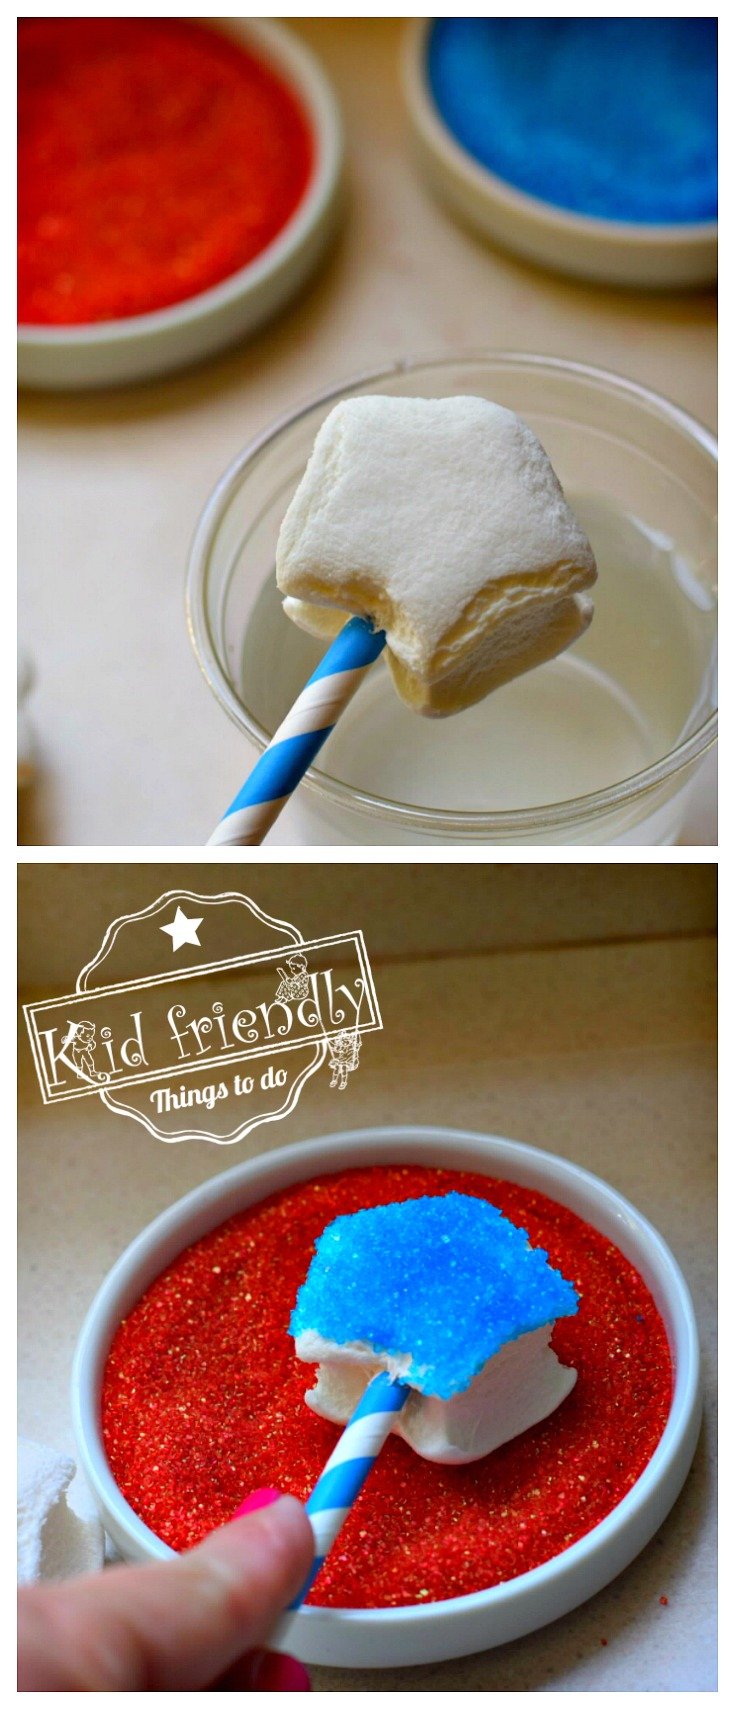 Easy Red, White and Blue Patriotic Star Marshmallow Pops for Kids - Fun Food Treat For summer, Fourth of July, Memorial Day or Labor Day - www.kidfriendlythingstodo.com